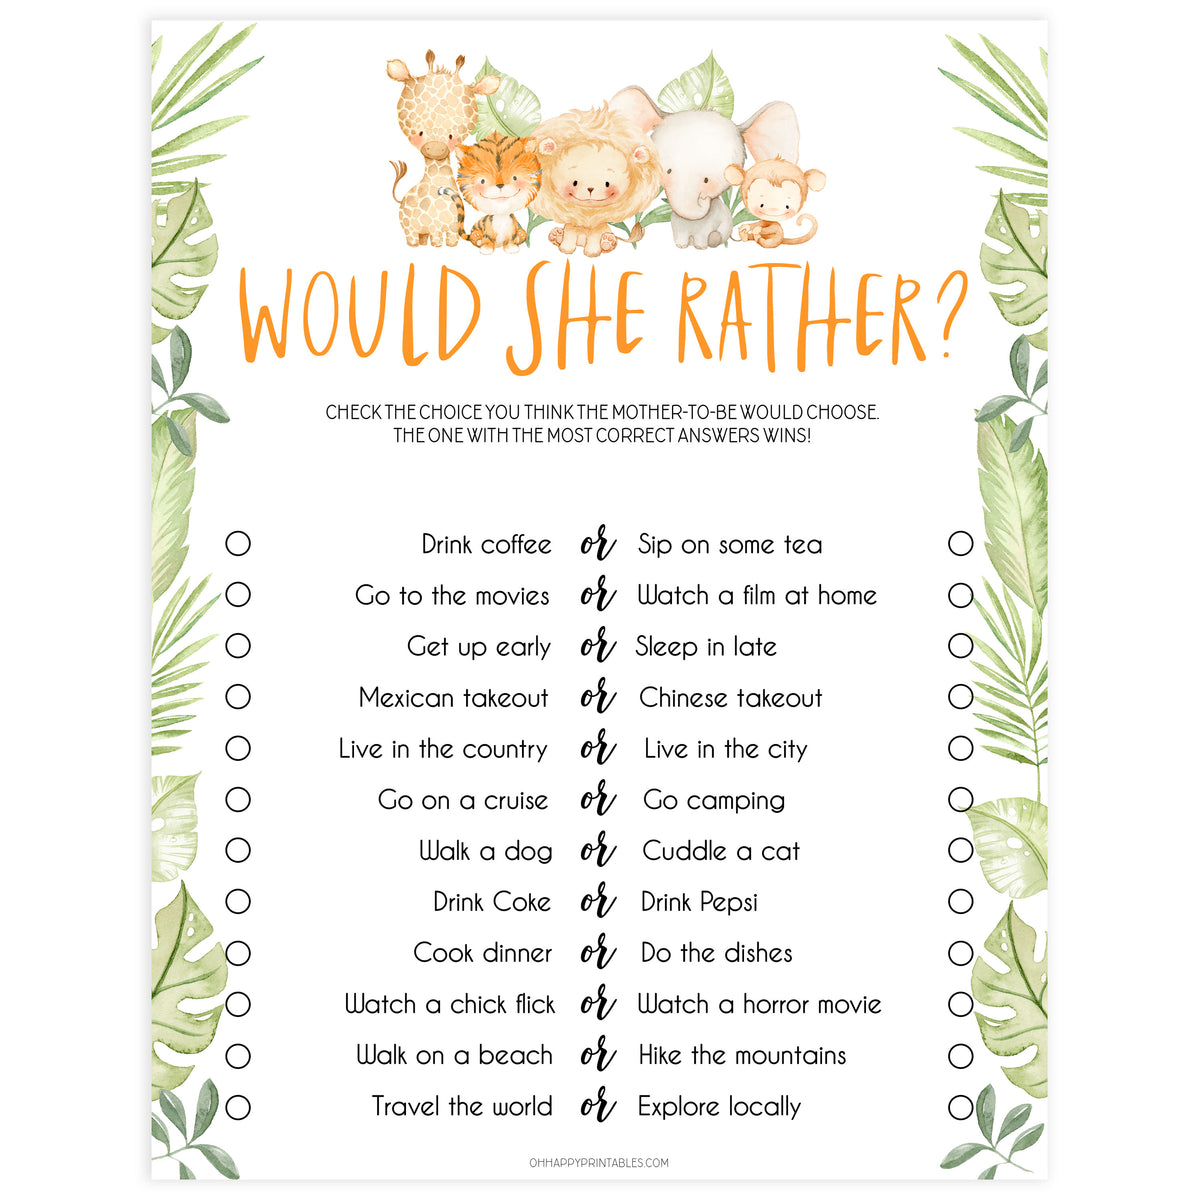 would she rather baby game, Printable baby shower games, safari animals baby games, baby shower games, fun baby shower ideas, top baby shower ideas, safari animals baby shower, baby shower games, fun baby shower ideas